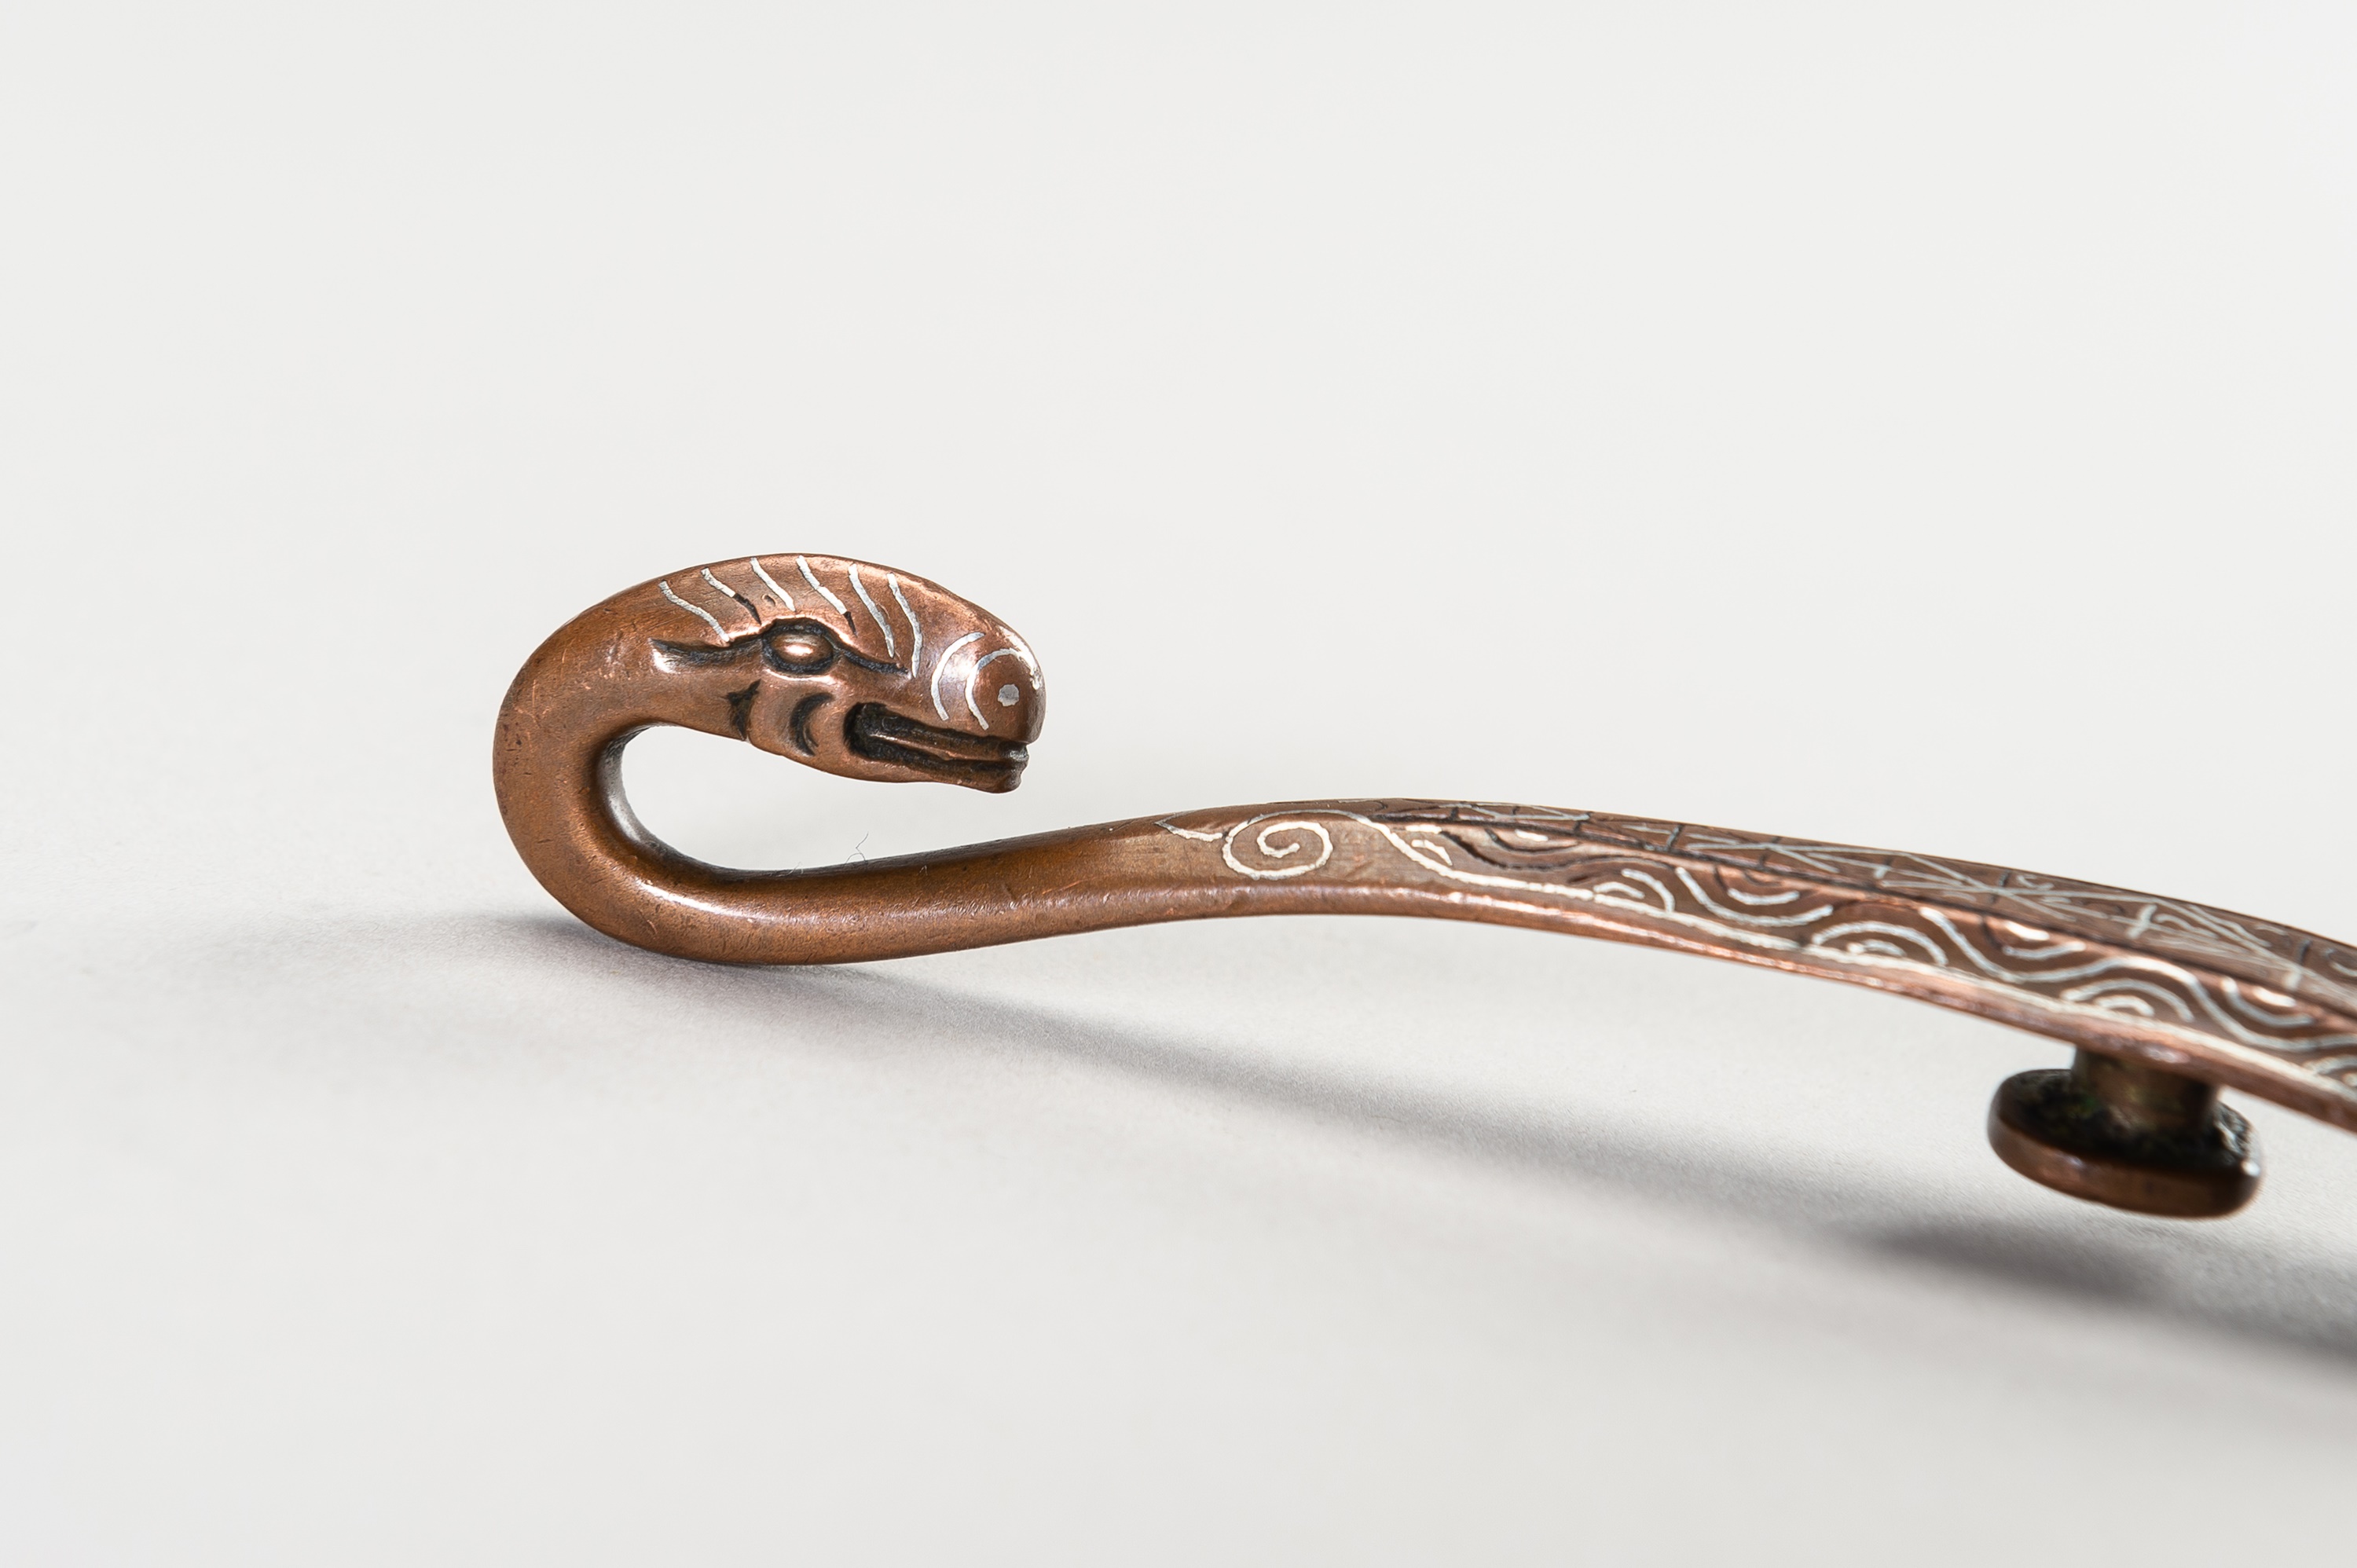 A FINE PAIR OF SILVER-INLAID BELT HOOKS - Image 3 of 9